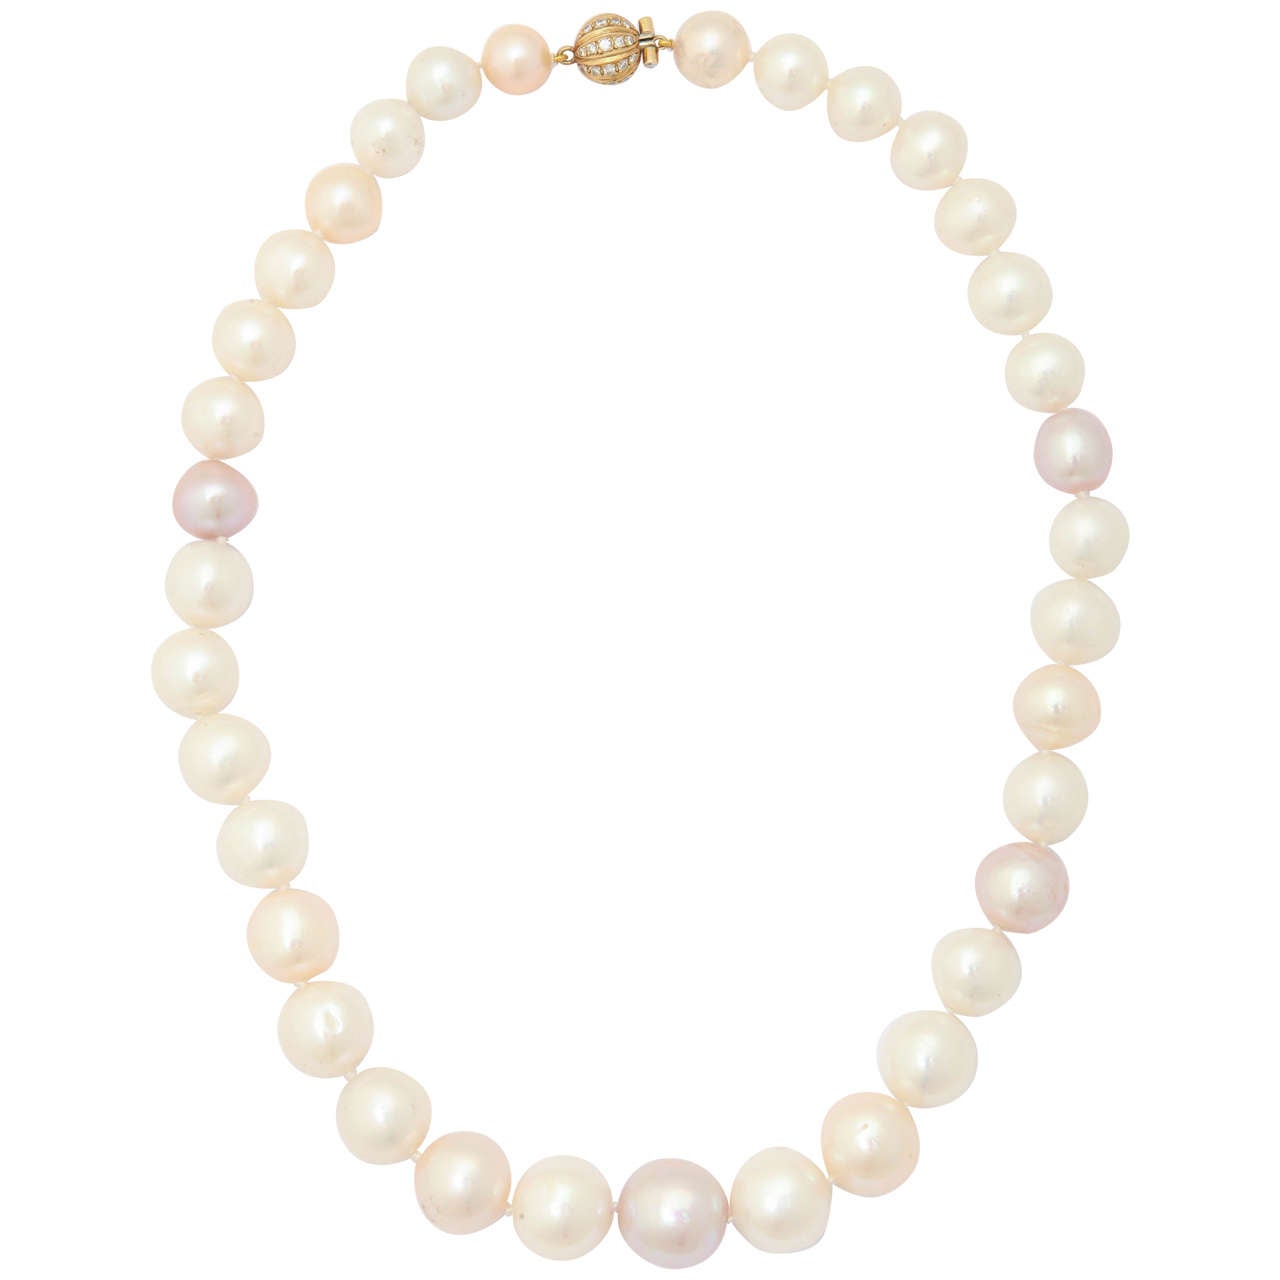 Impressive Large Fresh Water Pearl Necklace For Sale